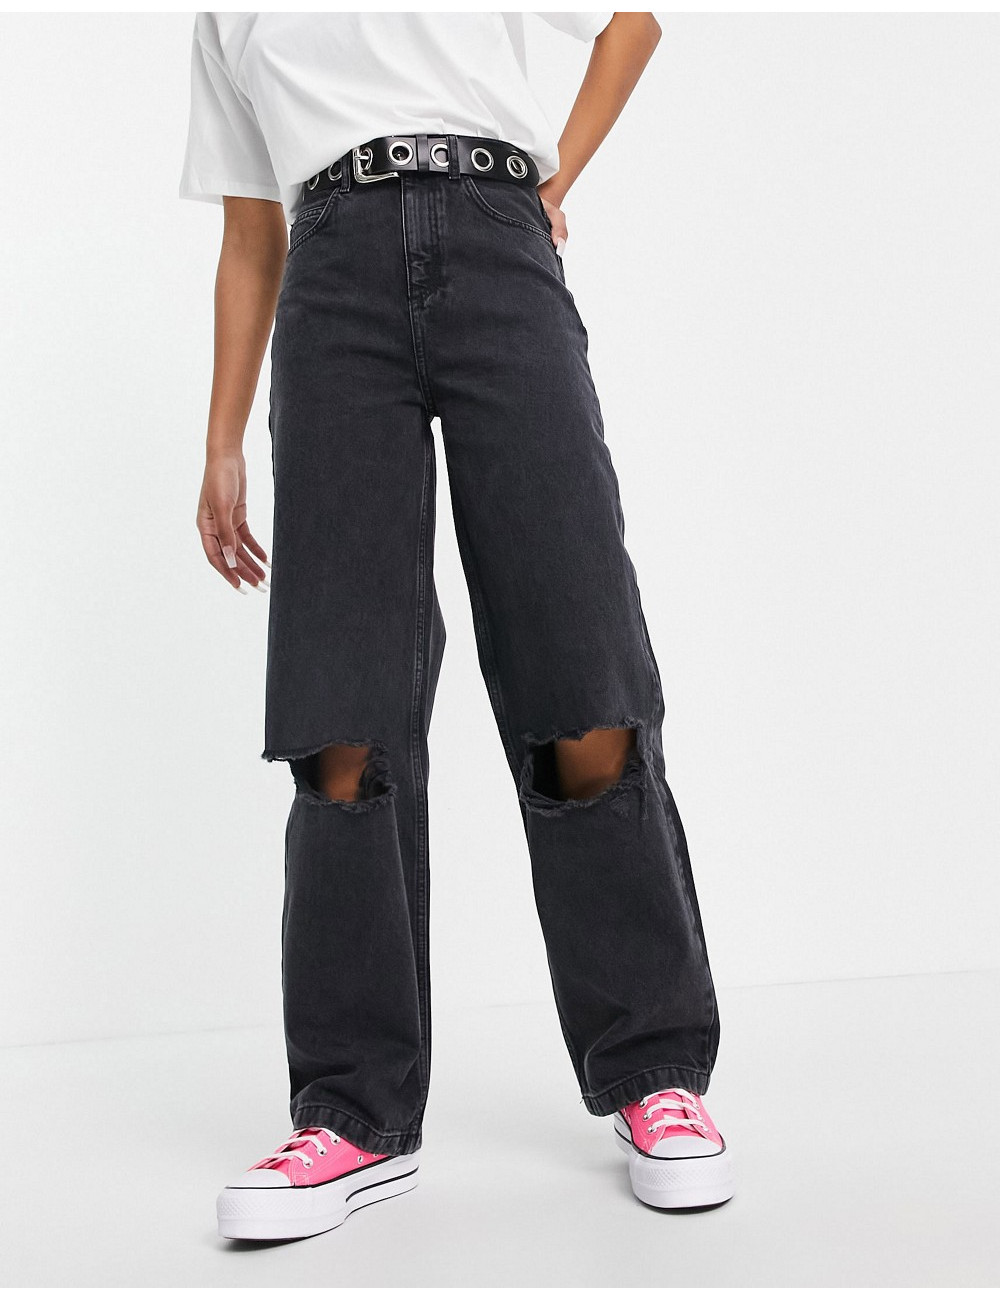 Topshop Baggy jean with...